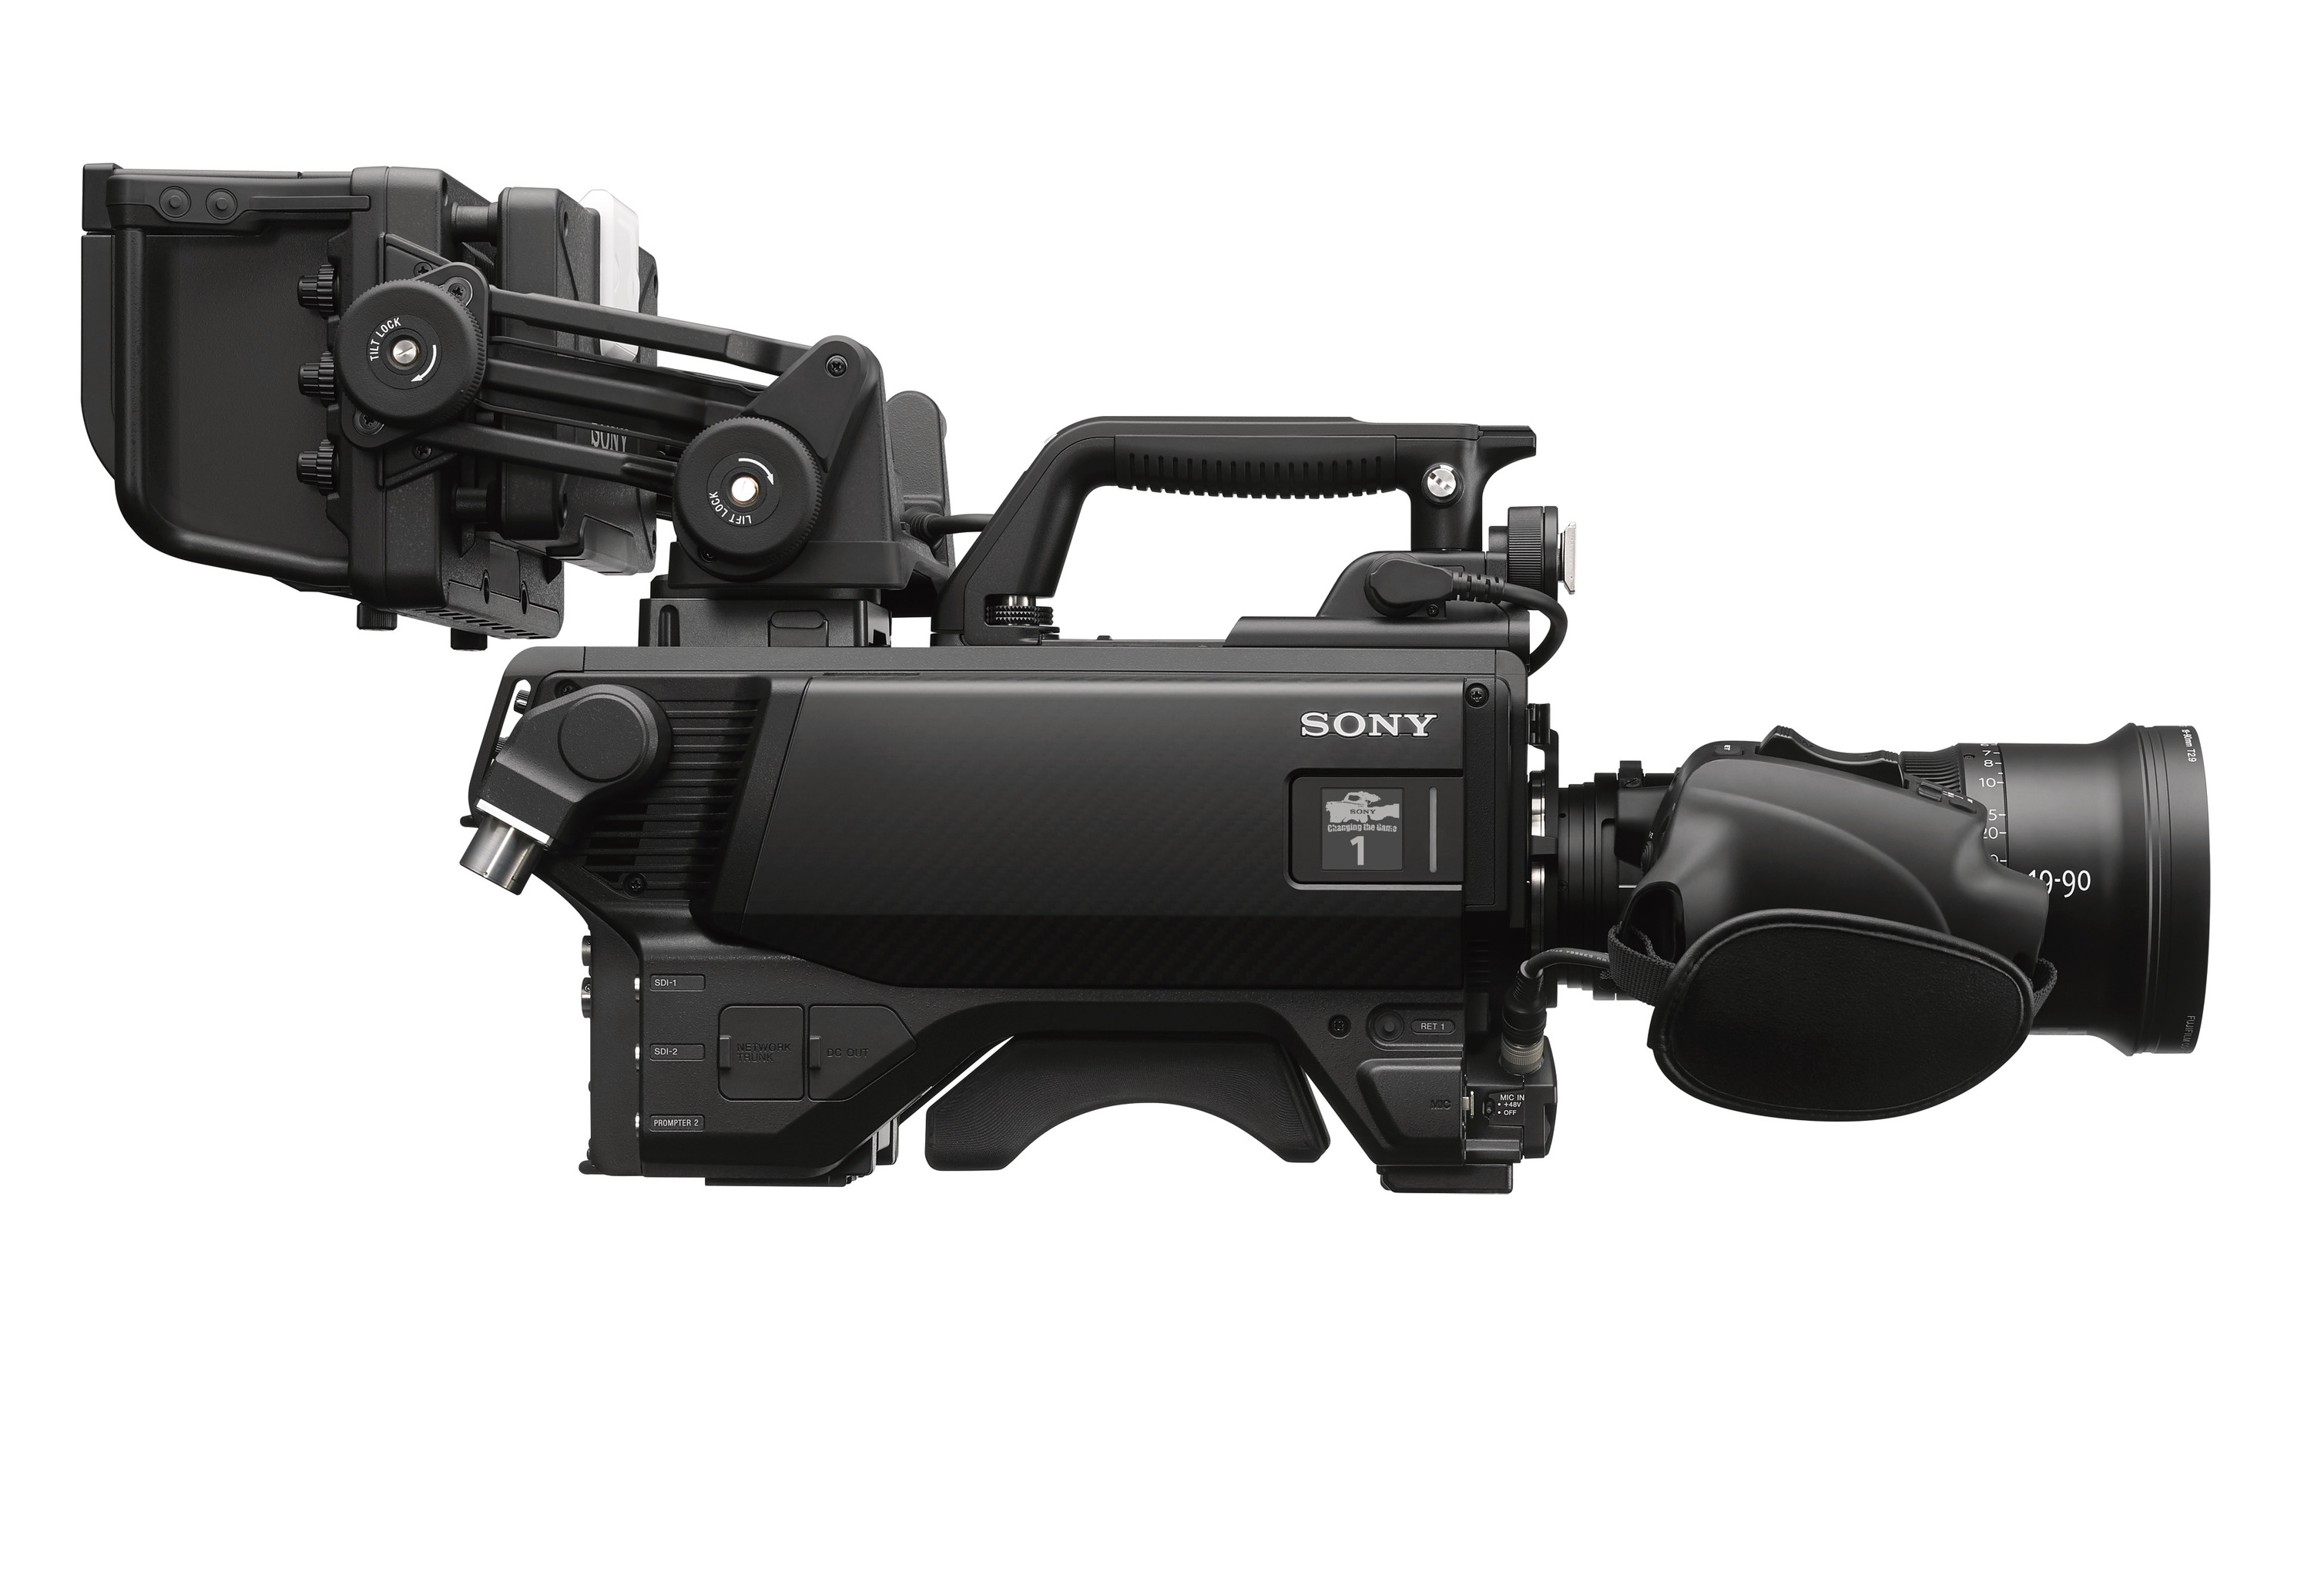 Available in December, the new Sony HDC-F5500 has a Super 35mm, 4K CMOS global shutter image sensor that enables shallow depth-of-field. Cr: Sony